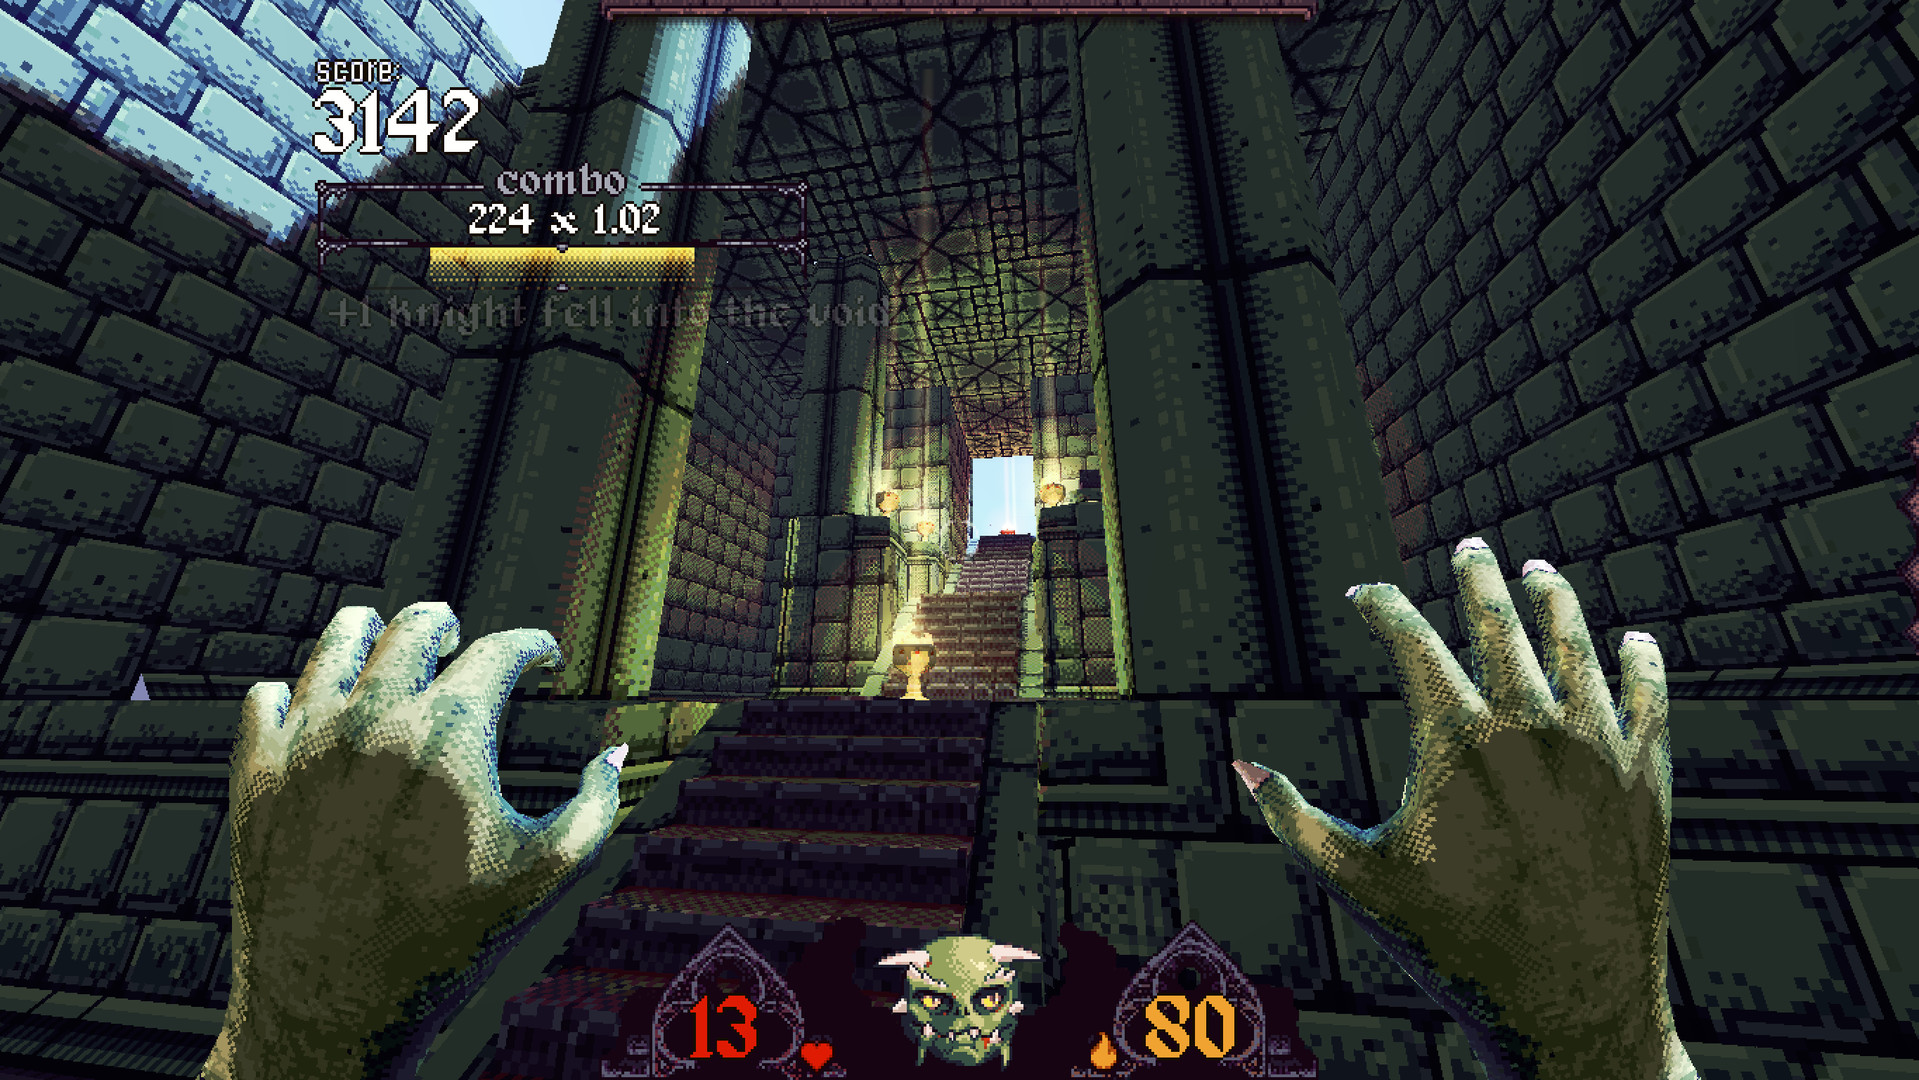 Cathedral 3-D Steam CD Key